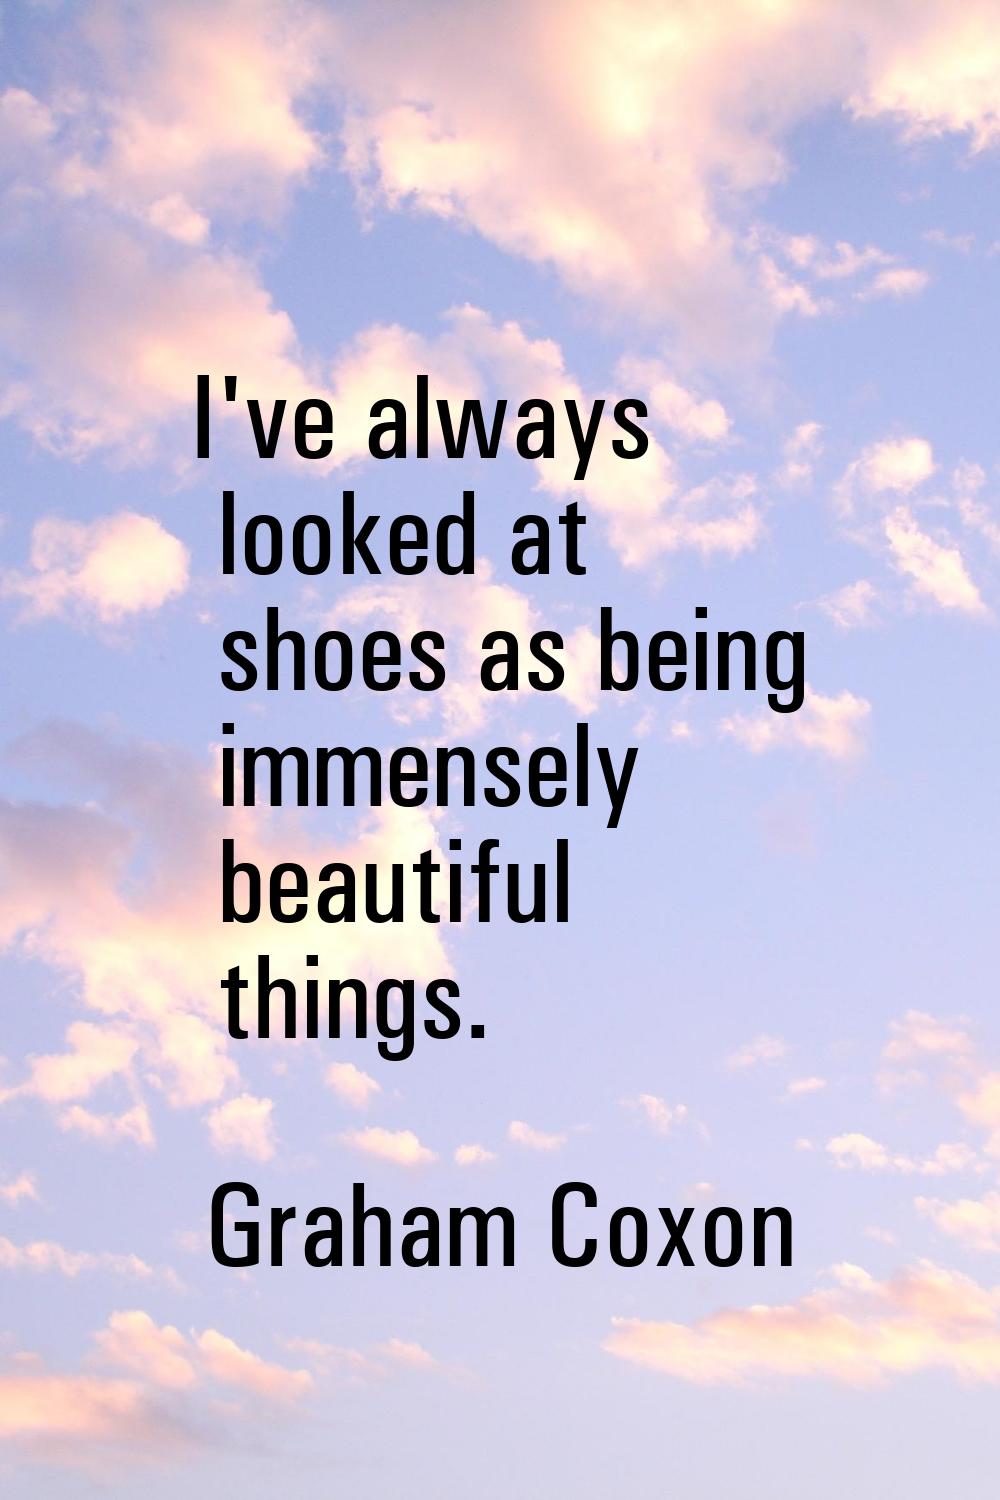 I've always looked at shoes as being immensely beautiful things.